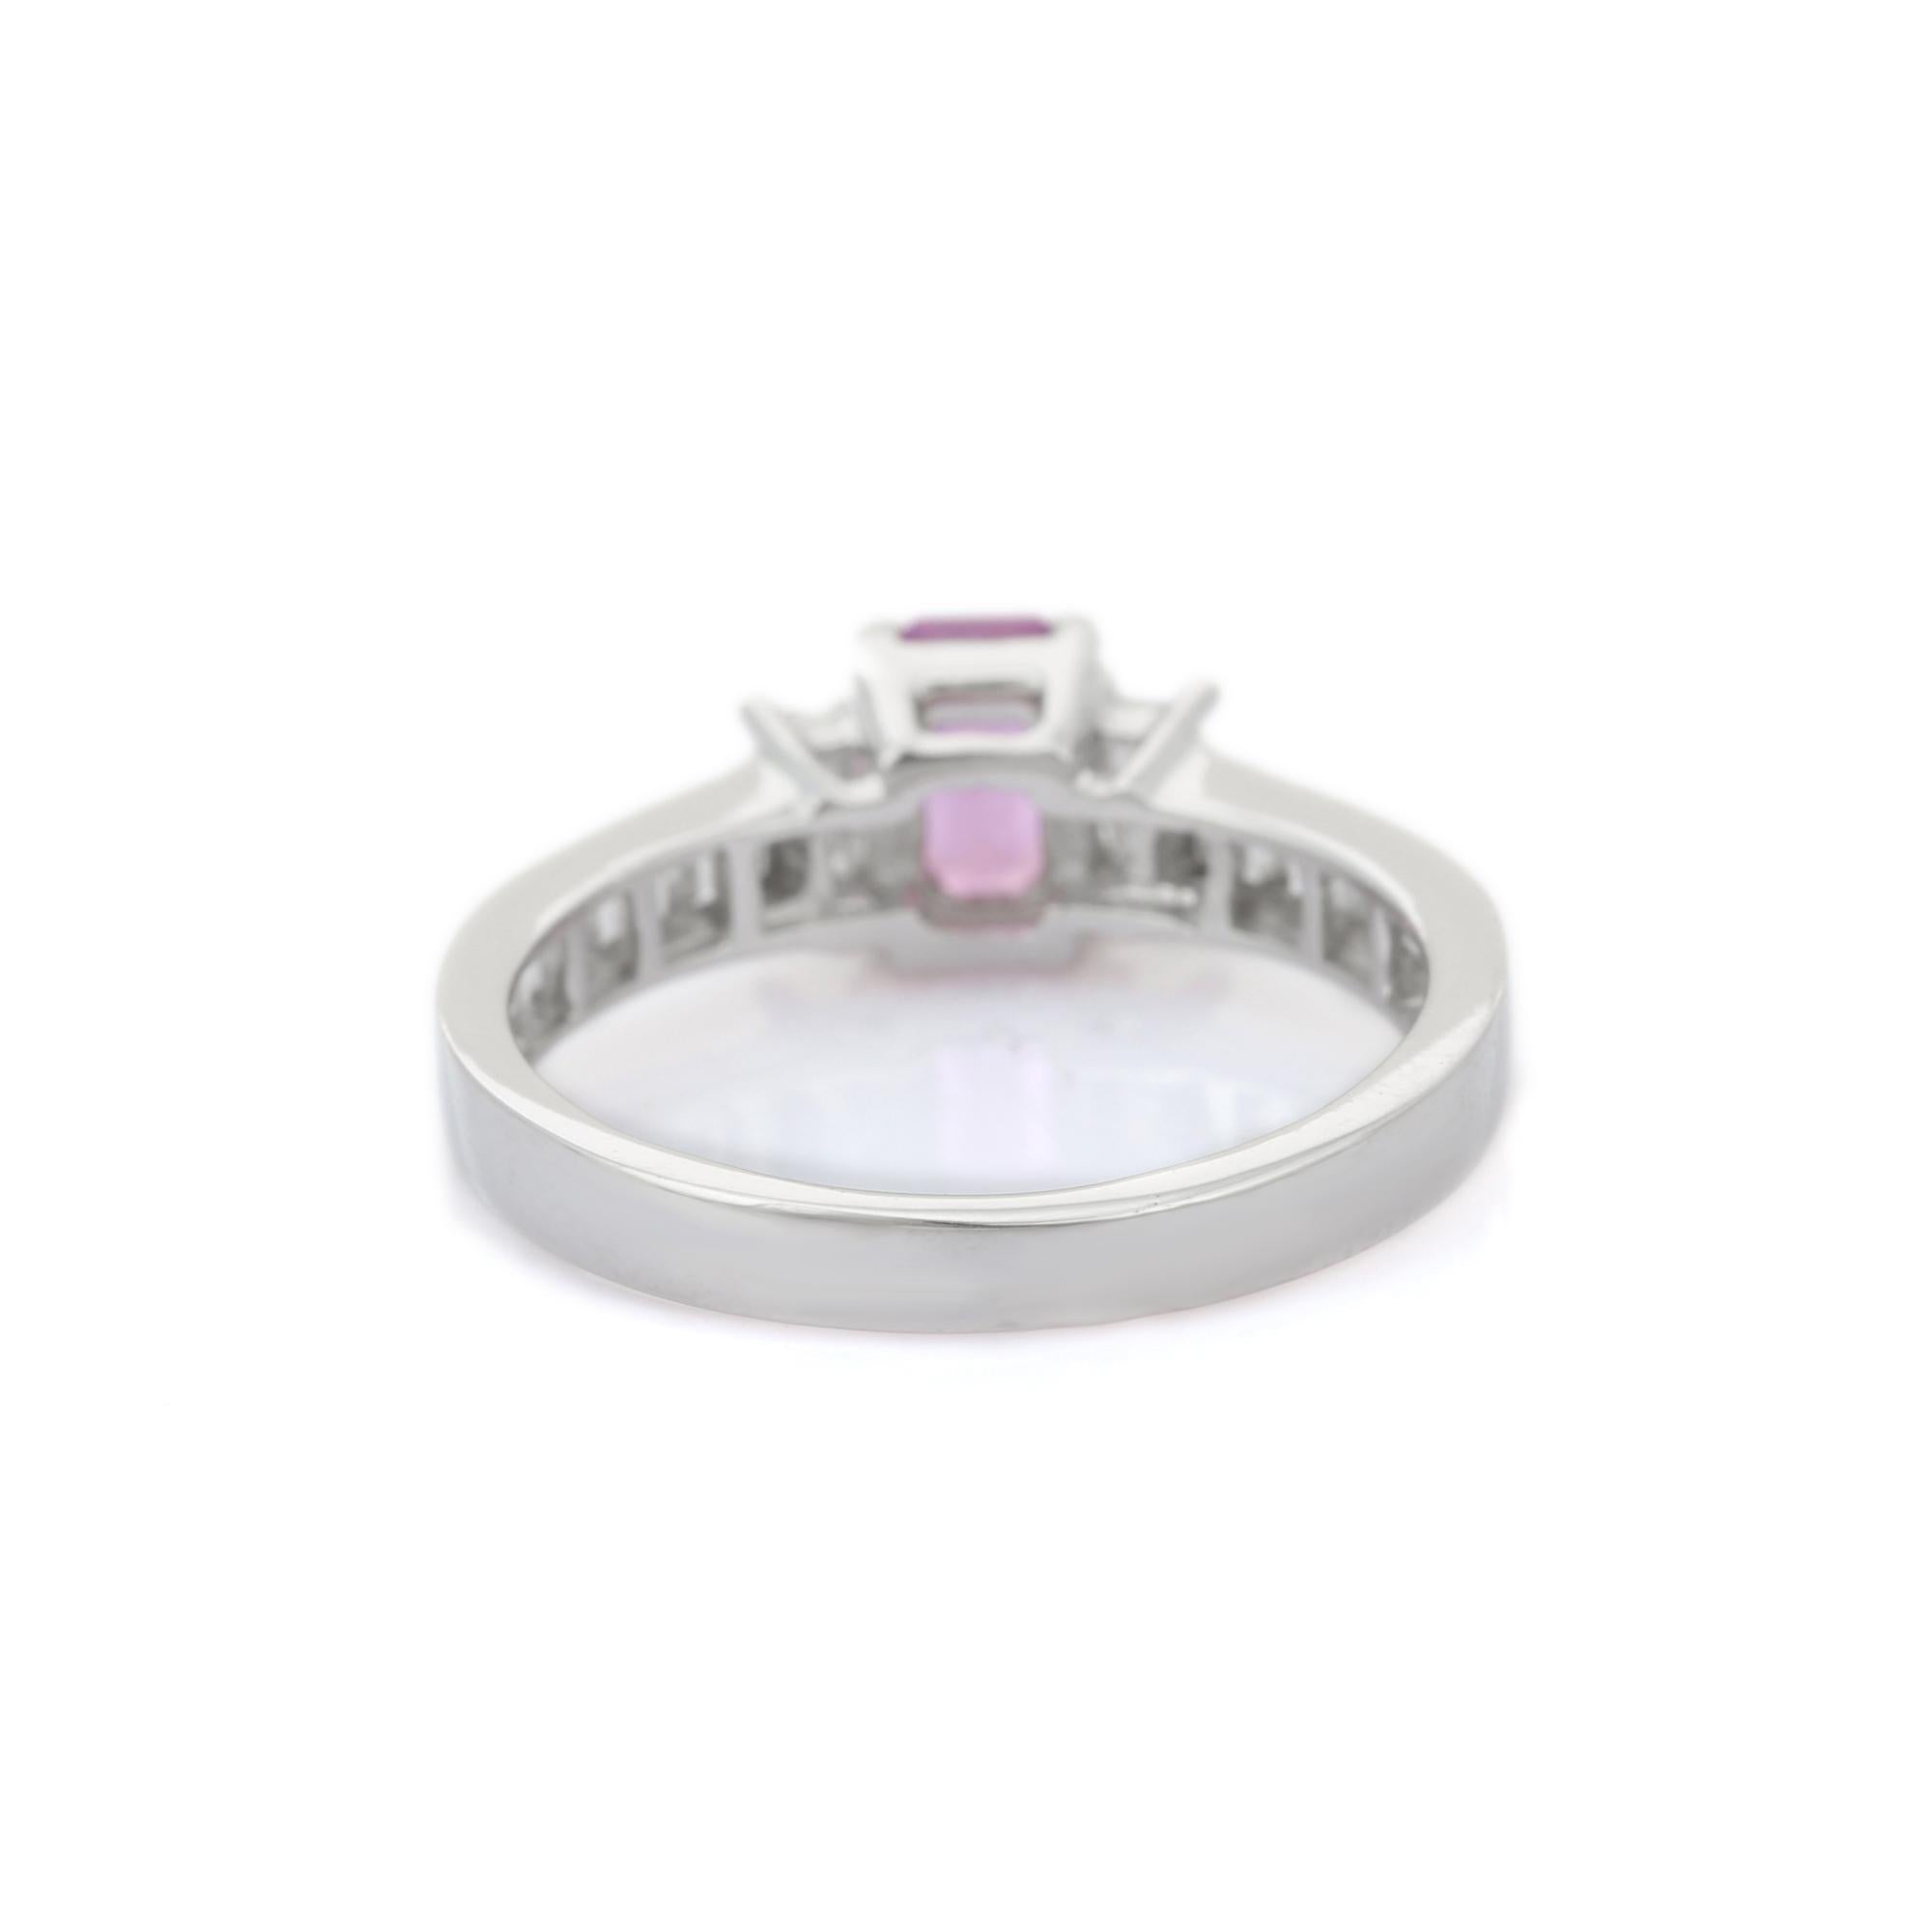 For Sale:  1.45 Carat Certified Pink Sapphire and Diamond Engagement Ring in 18K White Gold 5